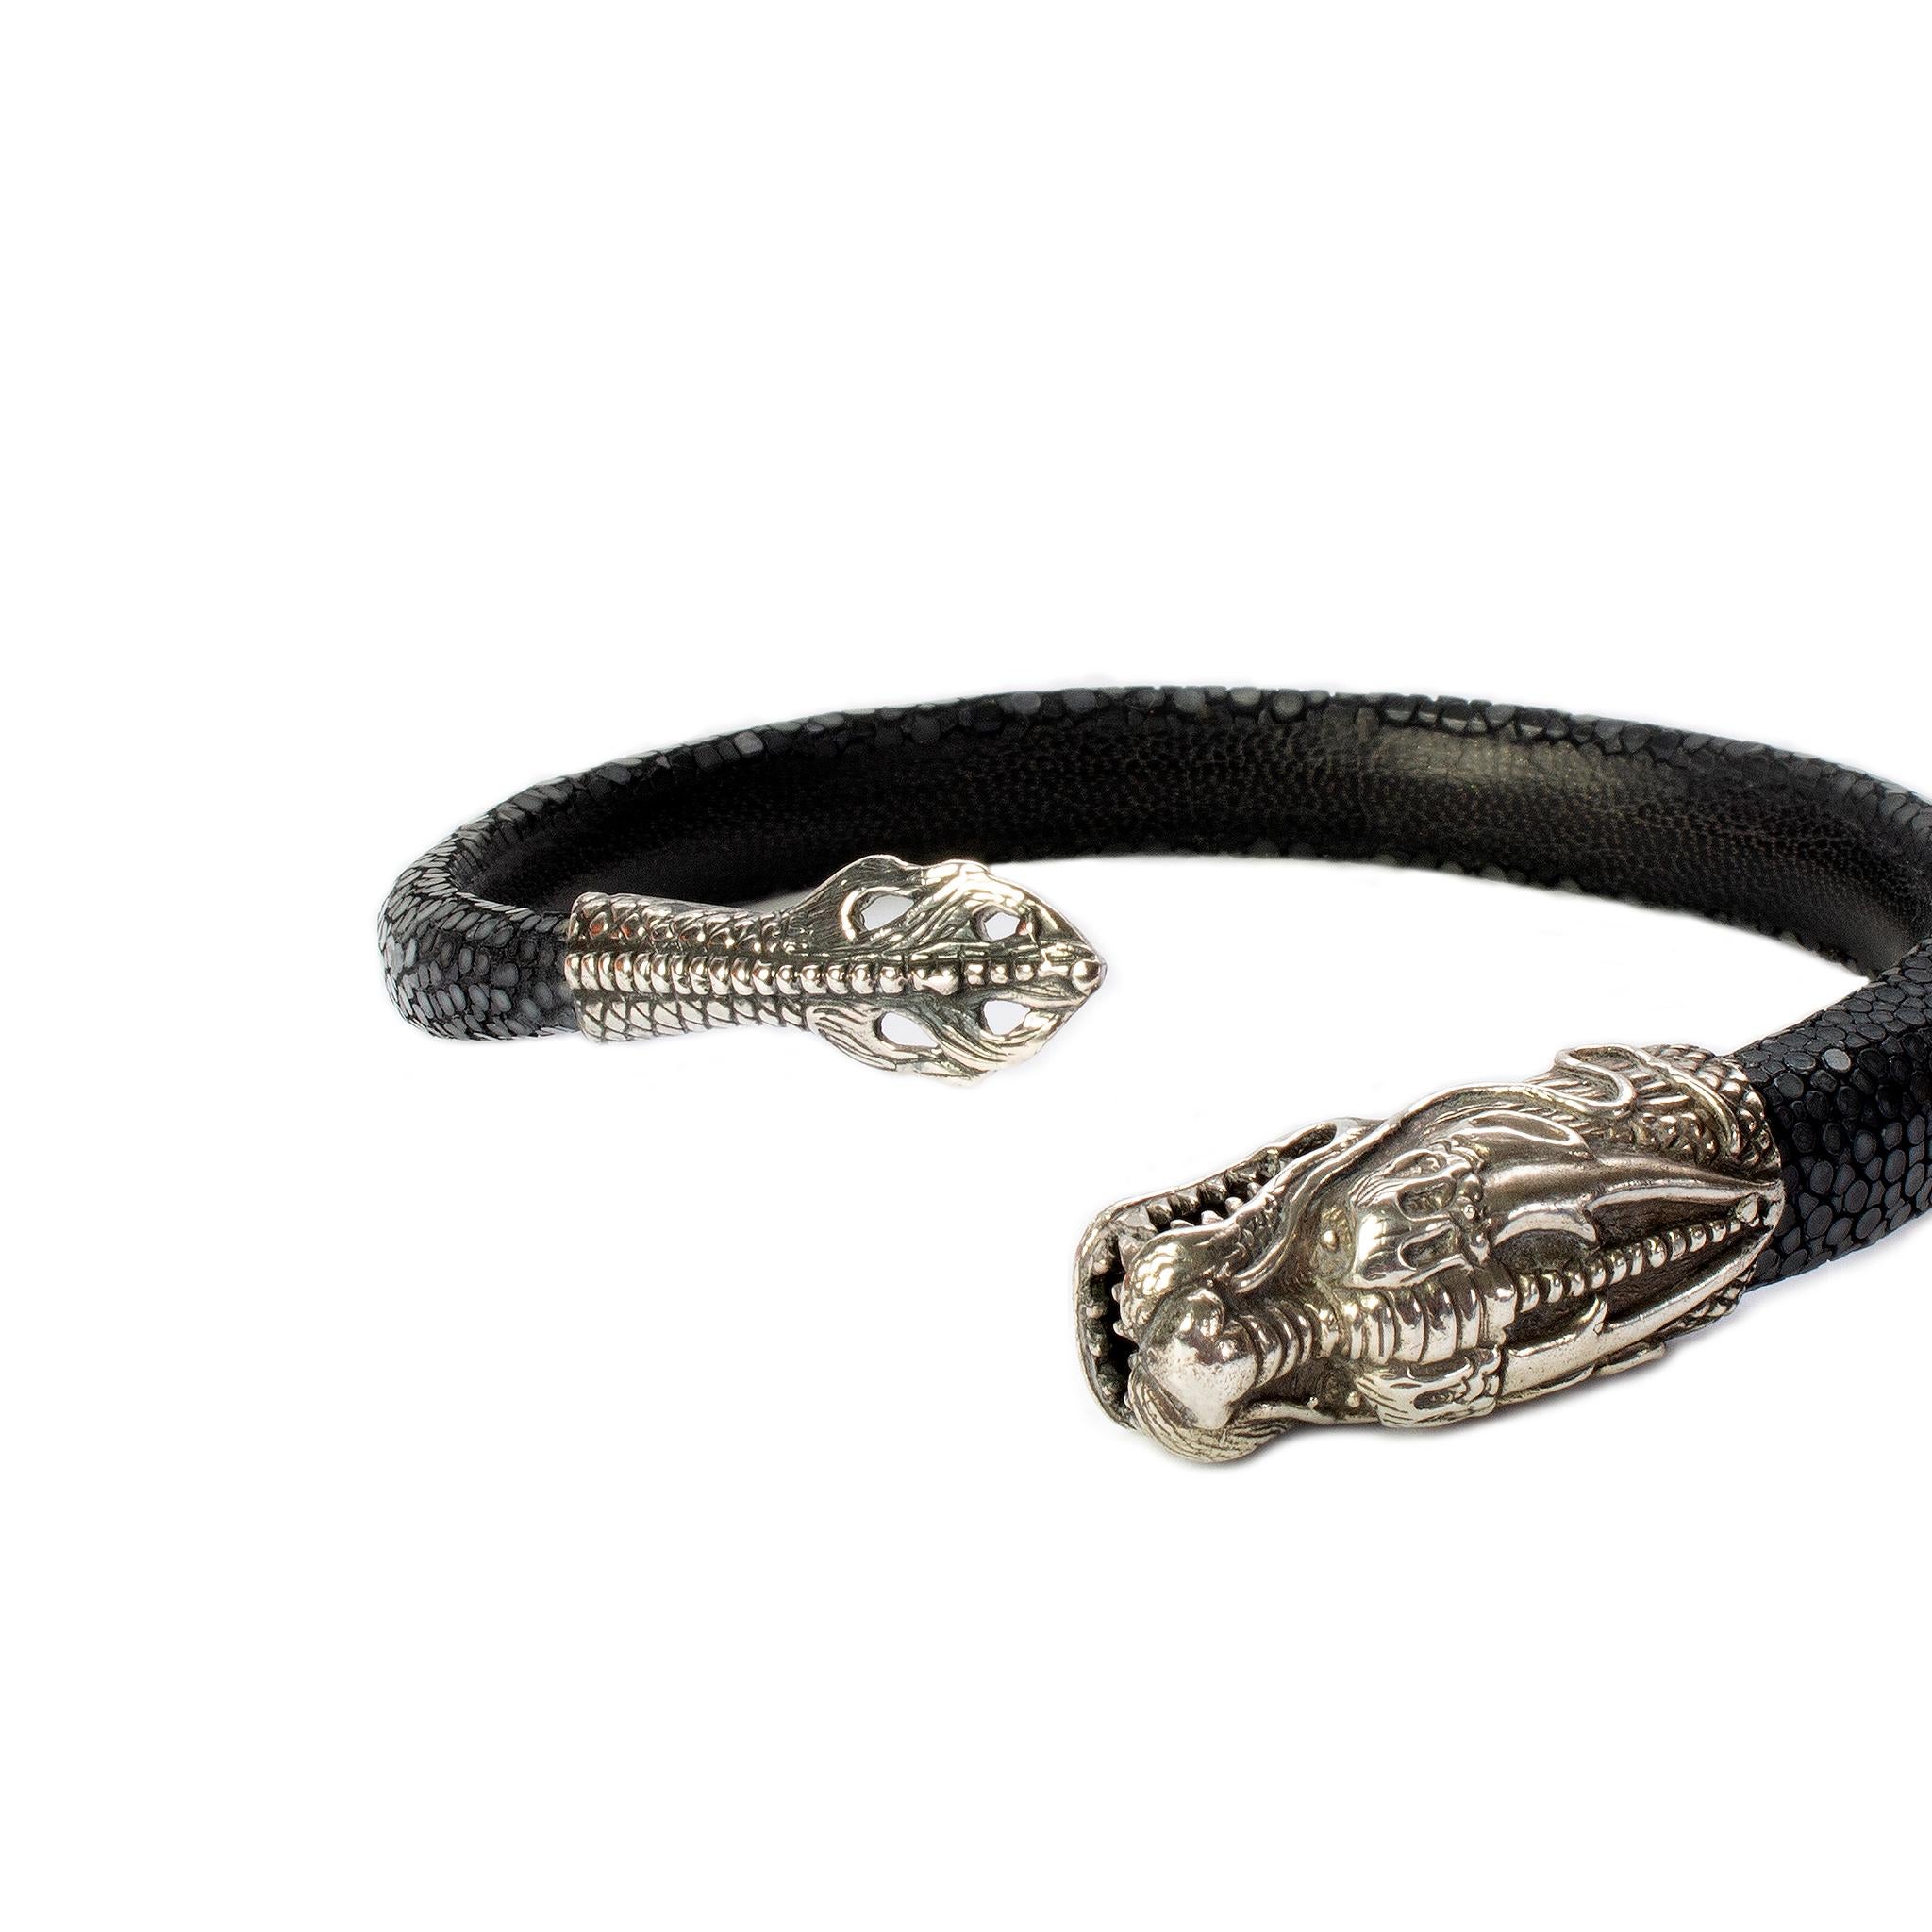 Product Details: Rare - Sterling Silver ‘Dragon’ Bracelet / Stingray Leather Outer / Leather Inlay - Adjustable Fit
Artist: Lou Guerin 
Fabric Content: Silver Plate / Stingray Leather / Leather Lining
Condition: Rare Collectors Piece - New
Length: